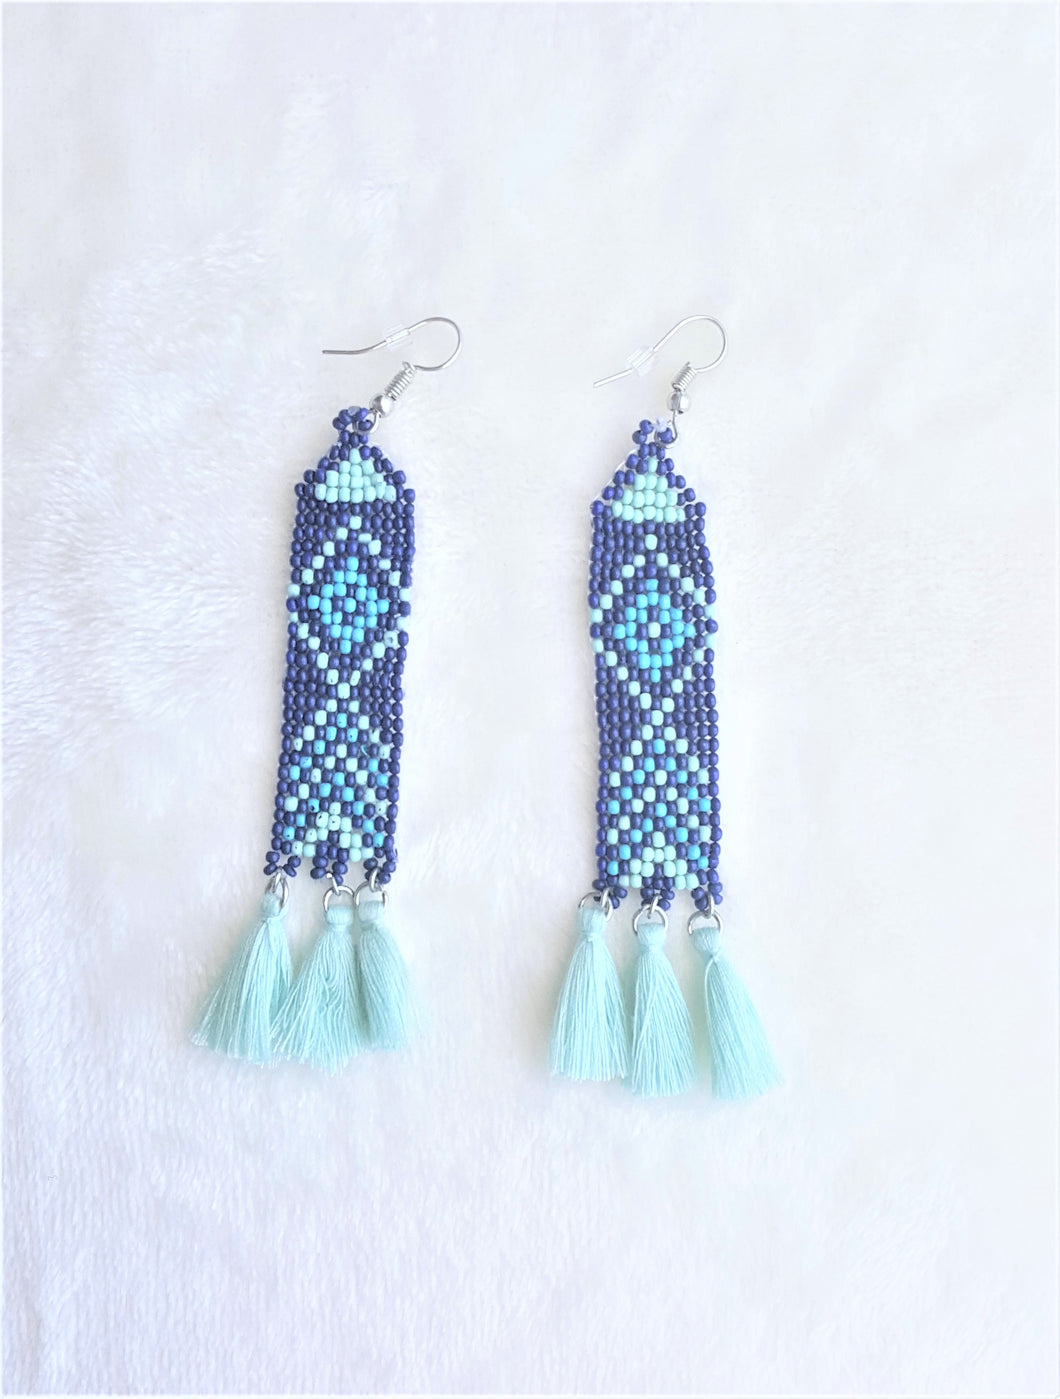 Earrings Woven Beads with Thread Tassels Green Coral Navy Blue Turquoise, Statement Earrings - Urban Flair USA